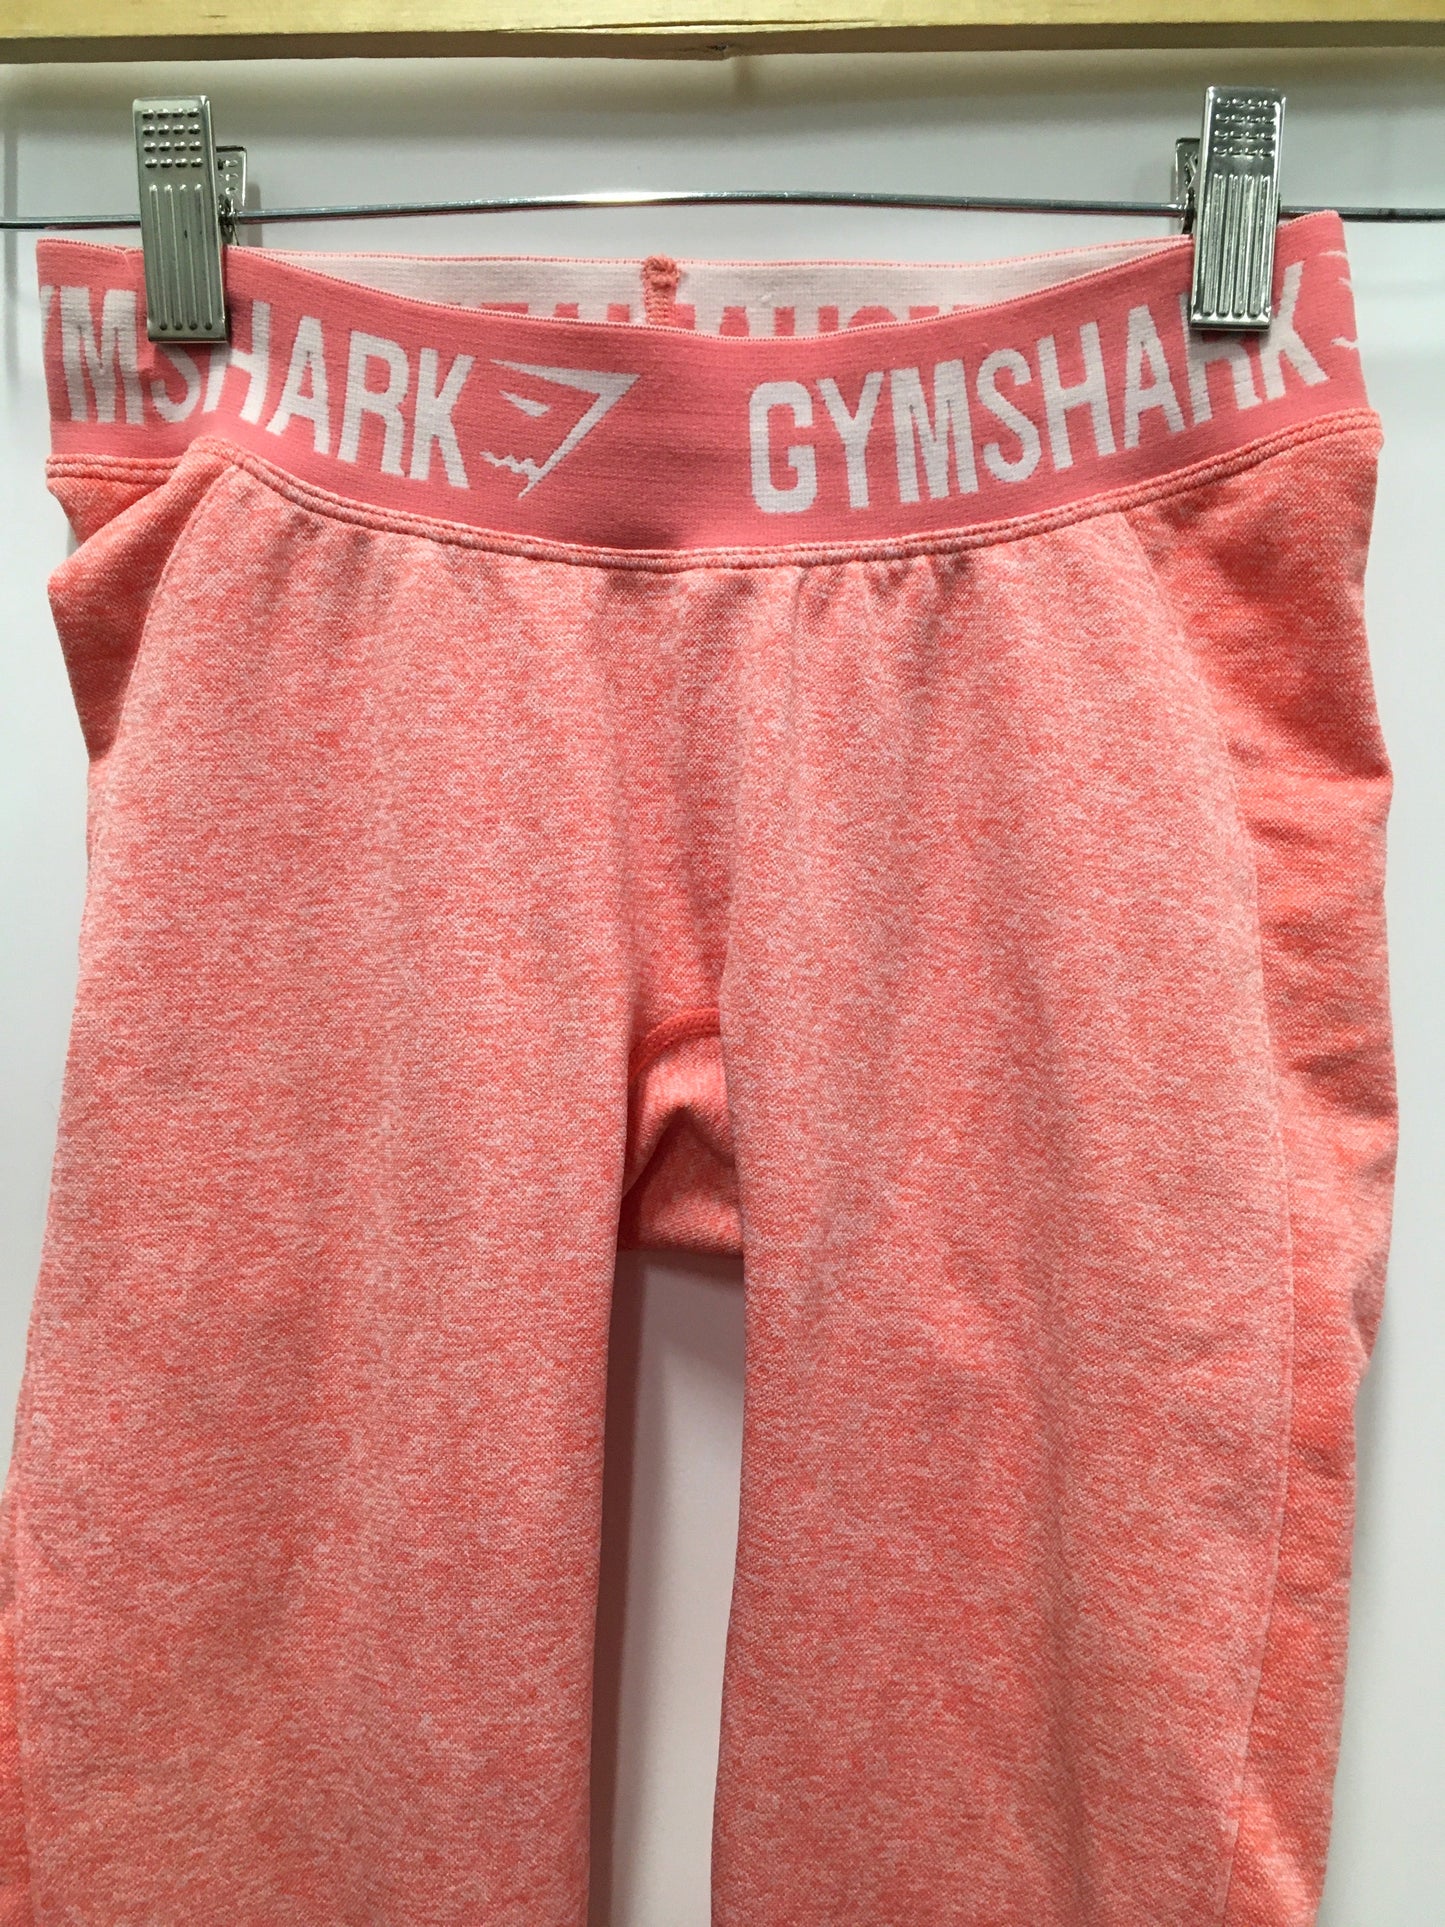 Coral Athletic Leggings Gym Shark, Size S